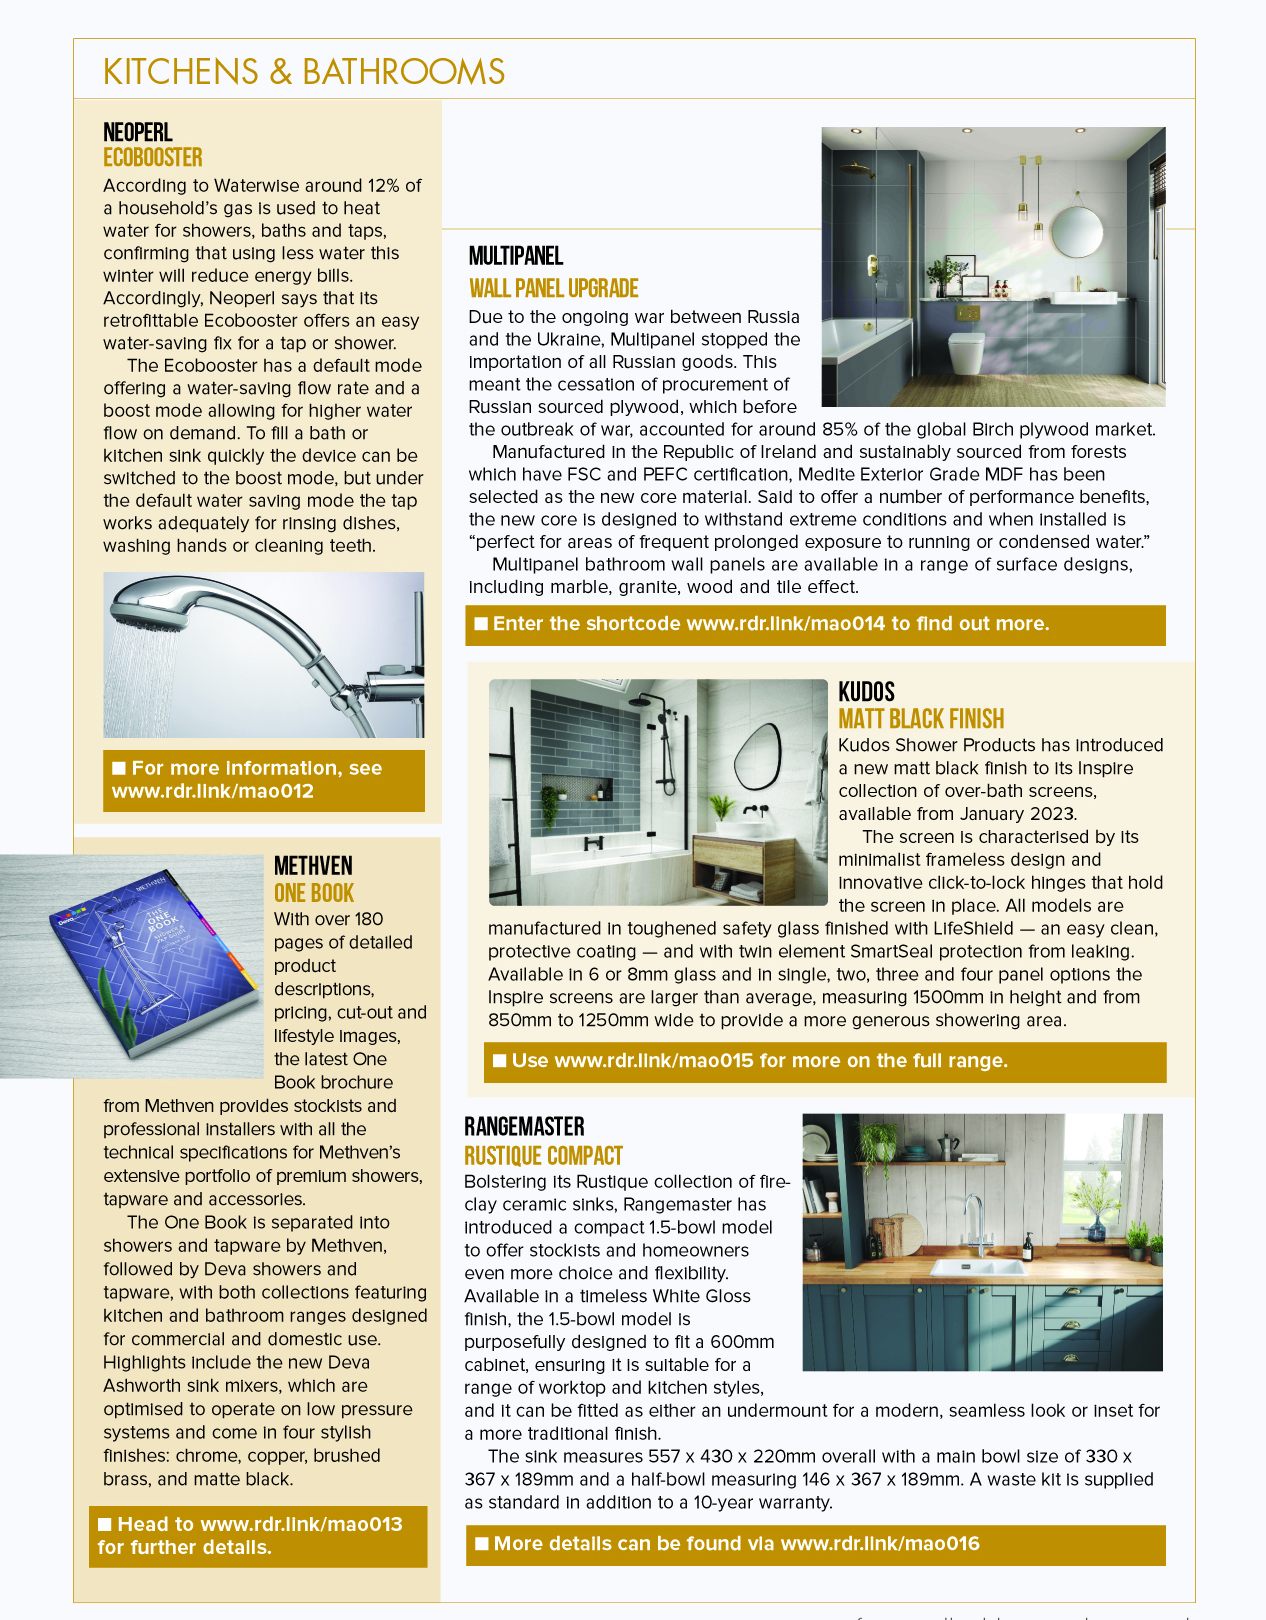 As featured in the January 2023 edition of the magazine, PBM presents some of the latest kitchens & bathrooms sector product innovations and new services for merchants from leading industry suppliers and manufacturers: